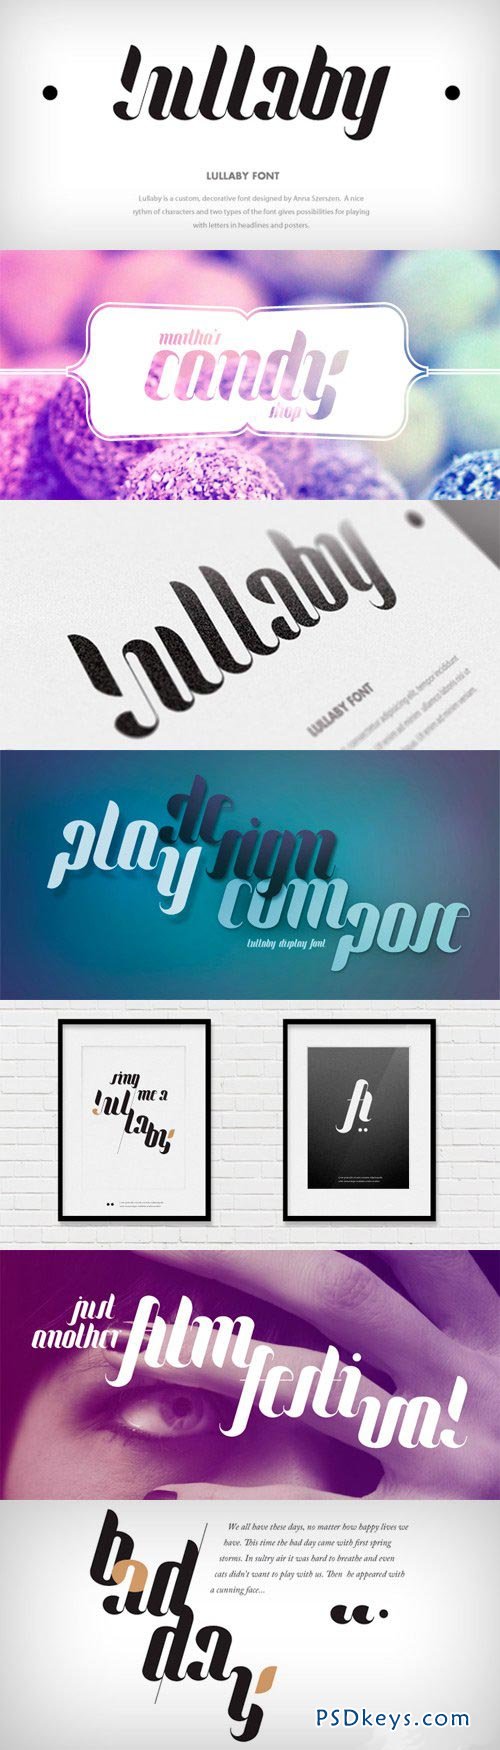 Lullaby Font for $20